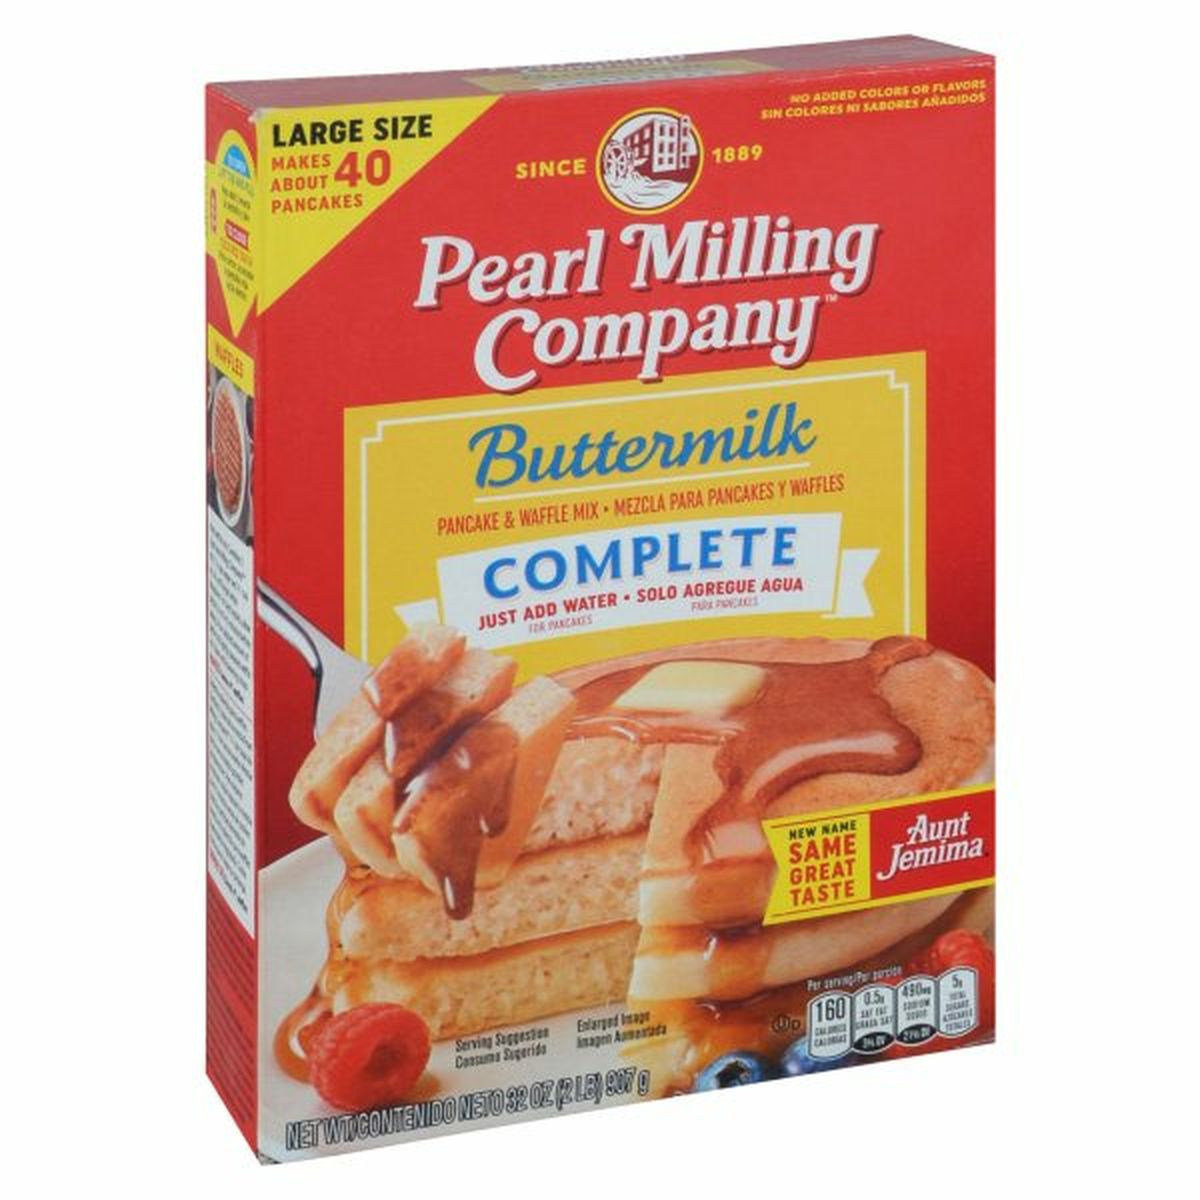 Calories in Pearl Milling Company Pancake & Waffle Mix, Buttermilk, Complete